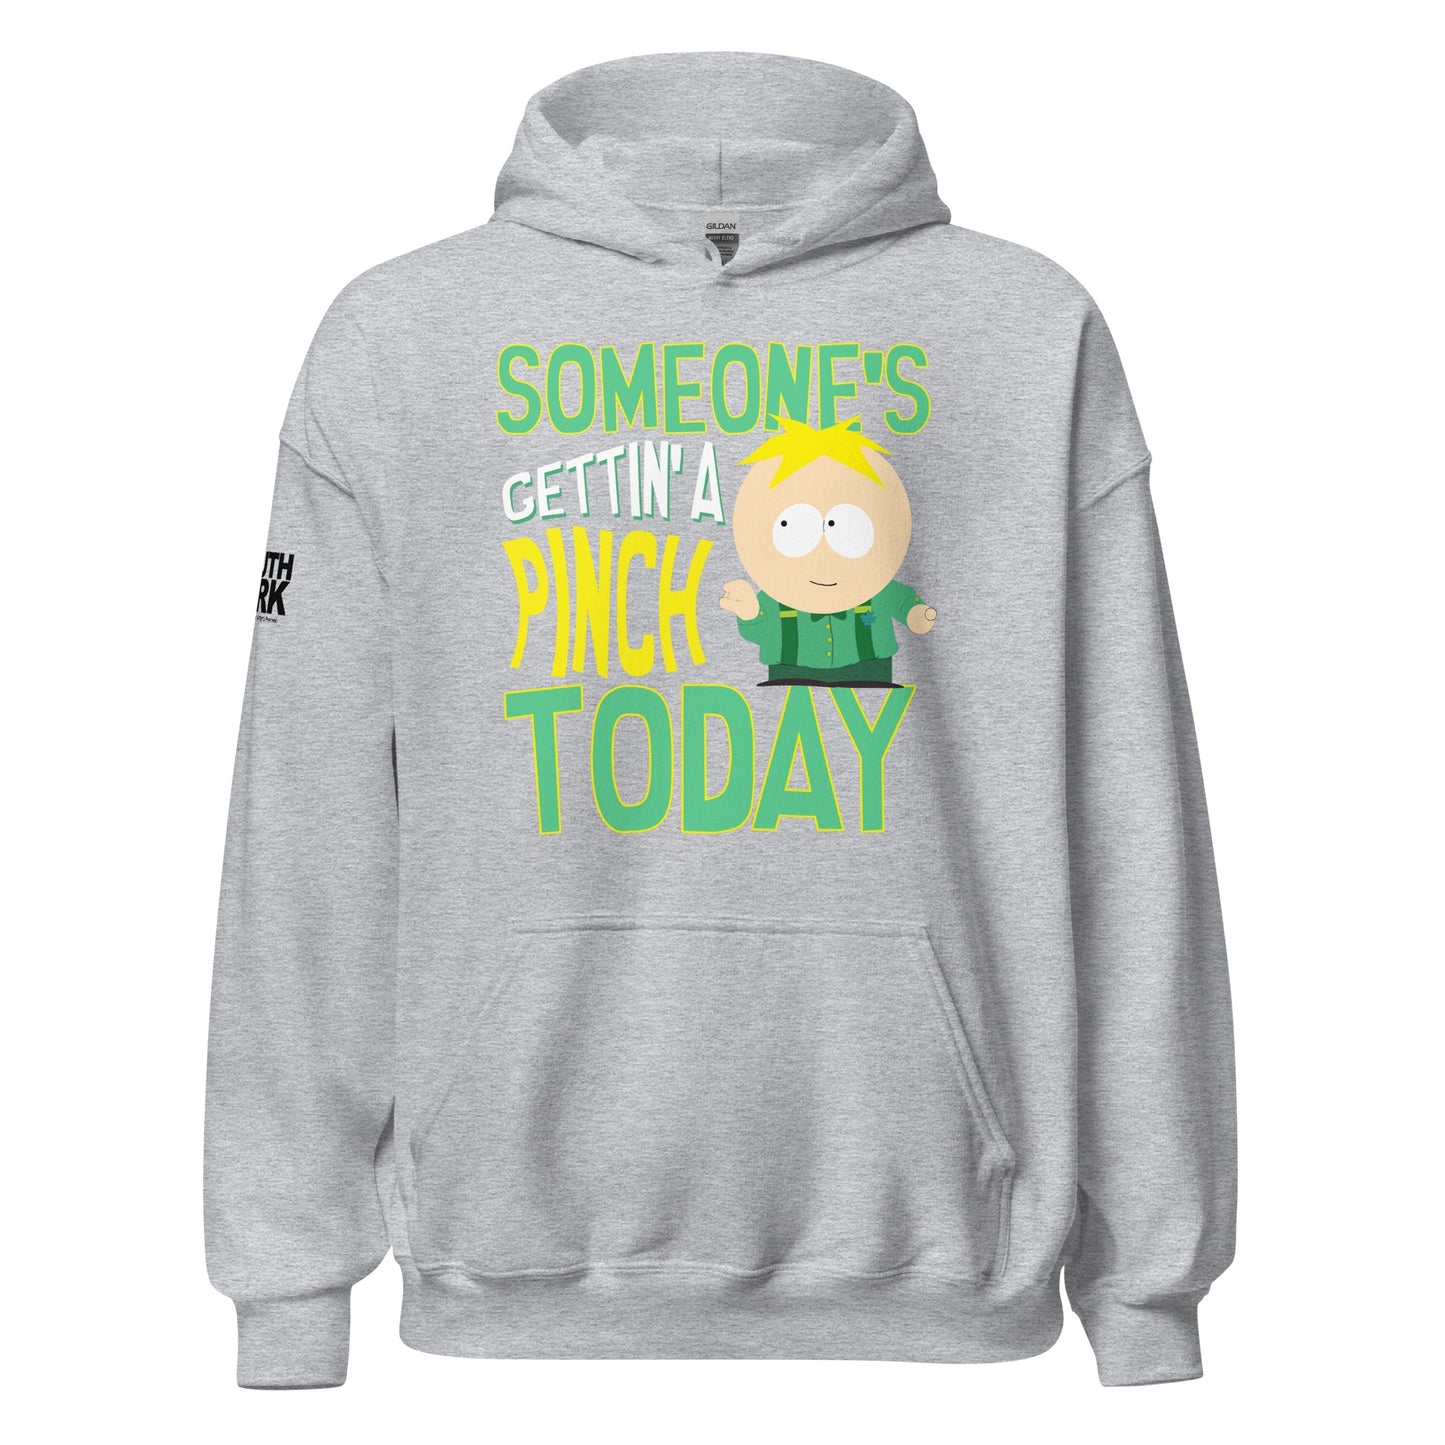 South Park Butters Someone's Getting A Pinch Today Sweatshirt mit Kapuze